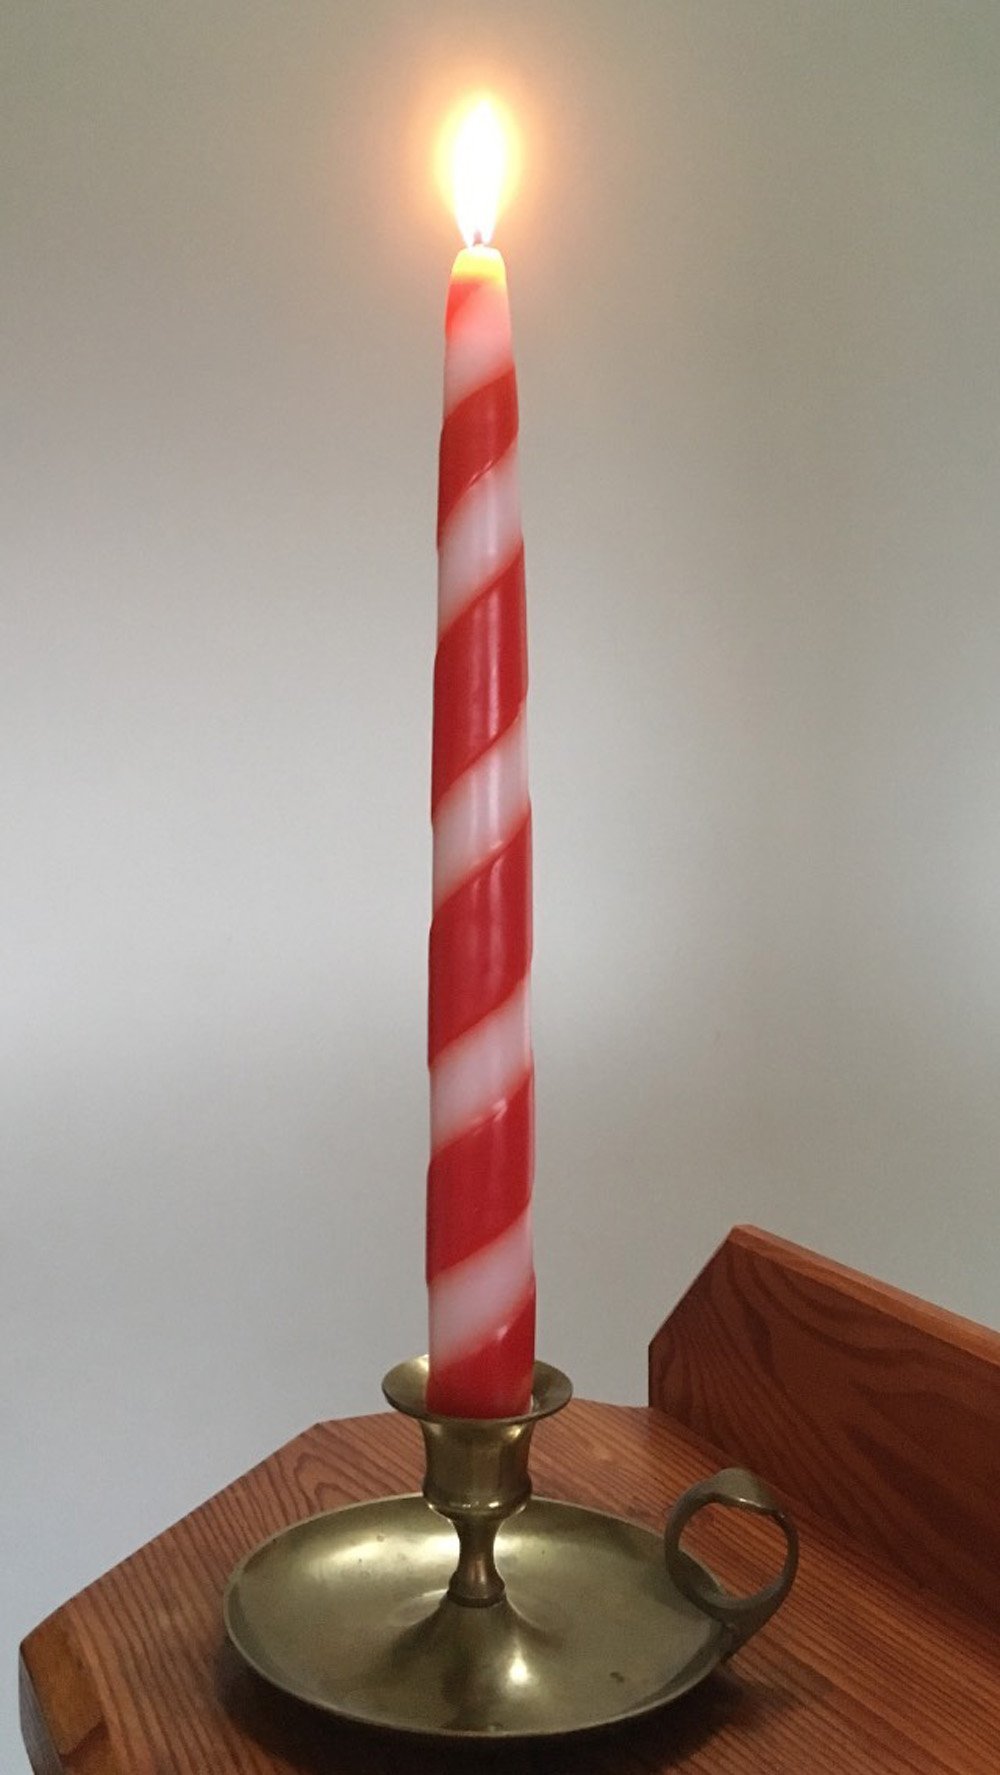 Candy Cane Tapers, 7/8D x 10"H, Fragrance Free Only, 2 pair Gift Box (4 singles) or 6 pair box - Fanny Bay Candle Company